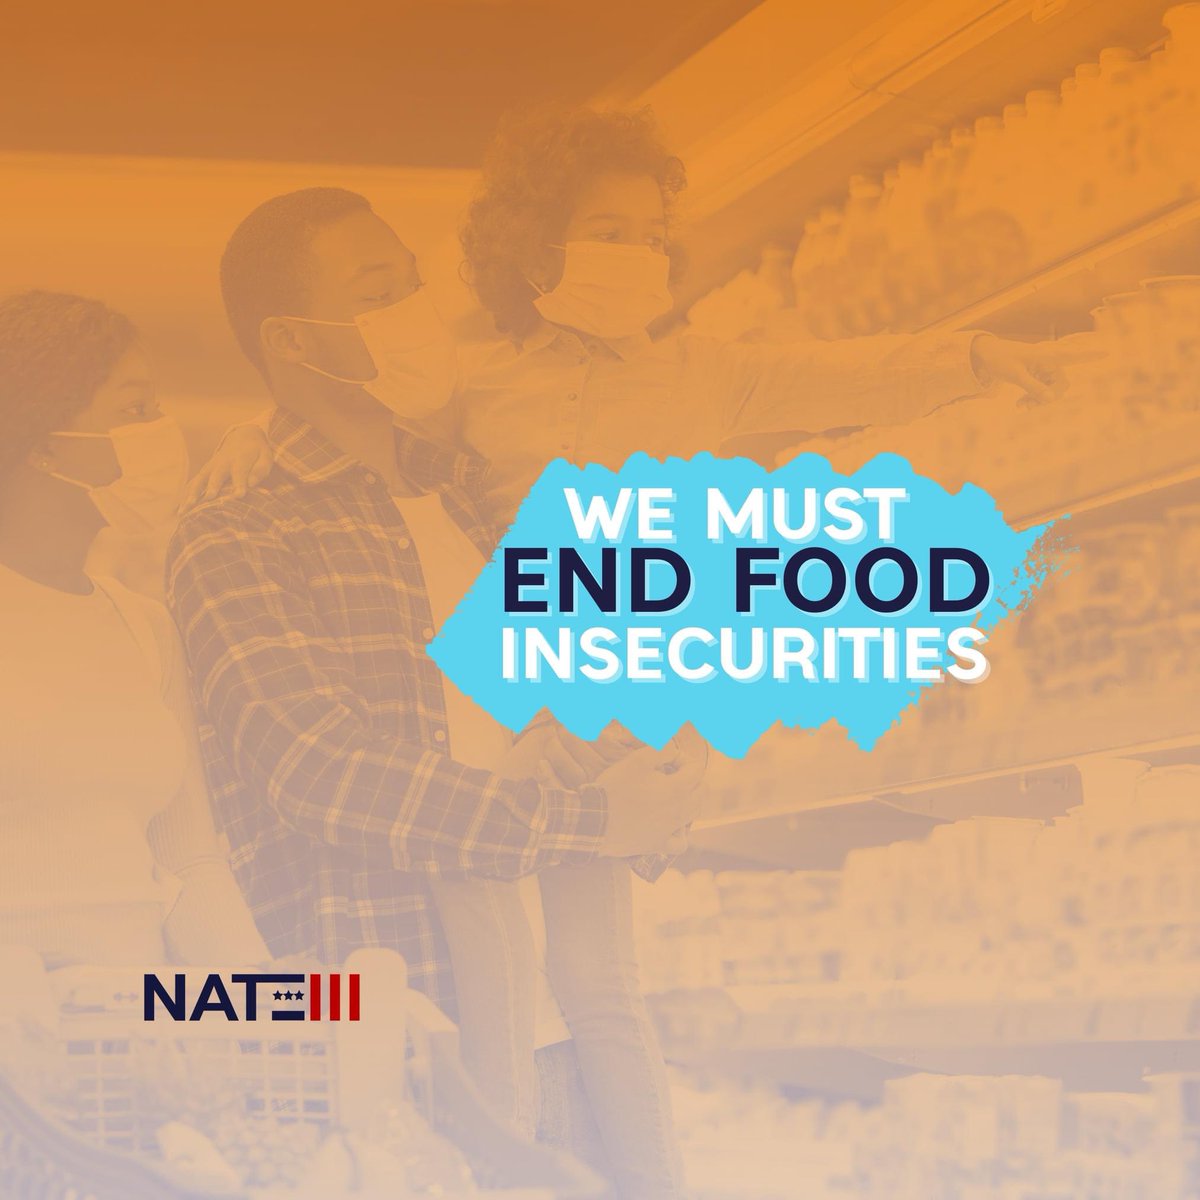 Black households with children report twice the rate of food hardship. I will fight to end food insecurities for all of TN3. It’s time for us to complete the task by passing our President’s #BuildBackBetter agenda. 

#EndFoodInsecurity 
#BridgingTheDivide
#PassTheSpendingBill